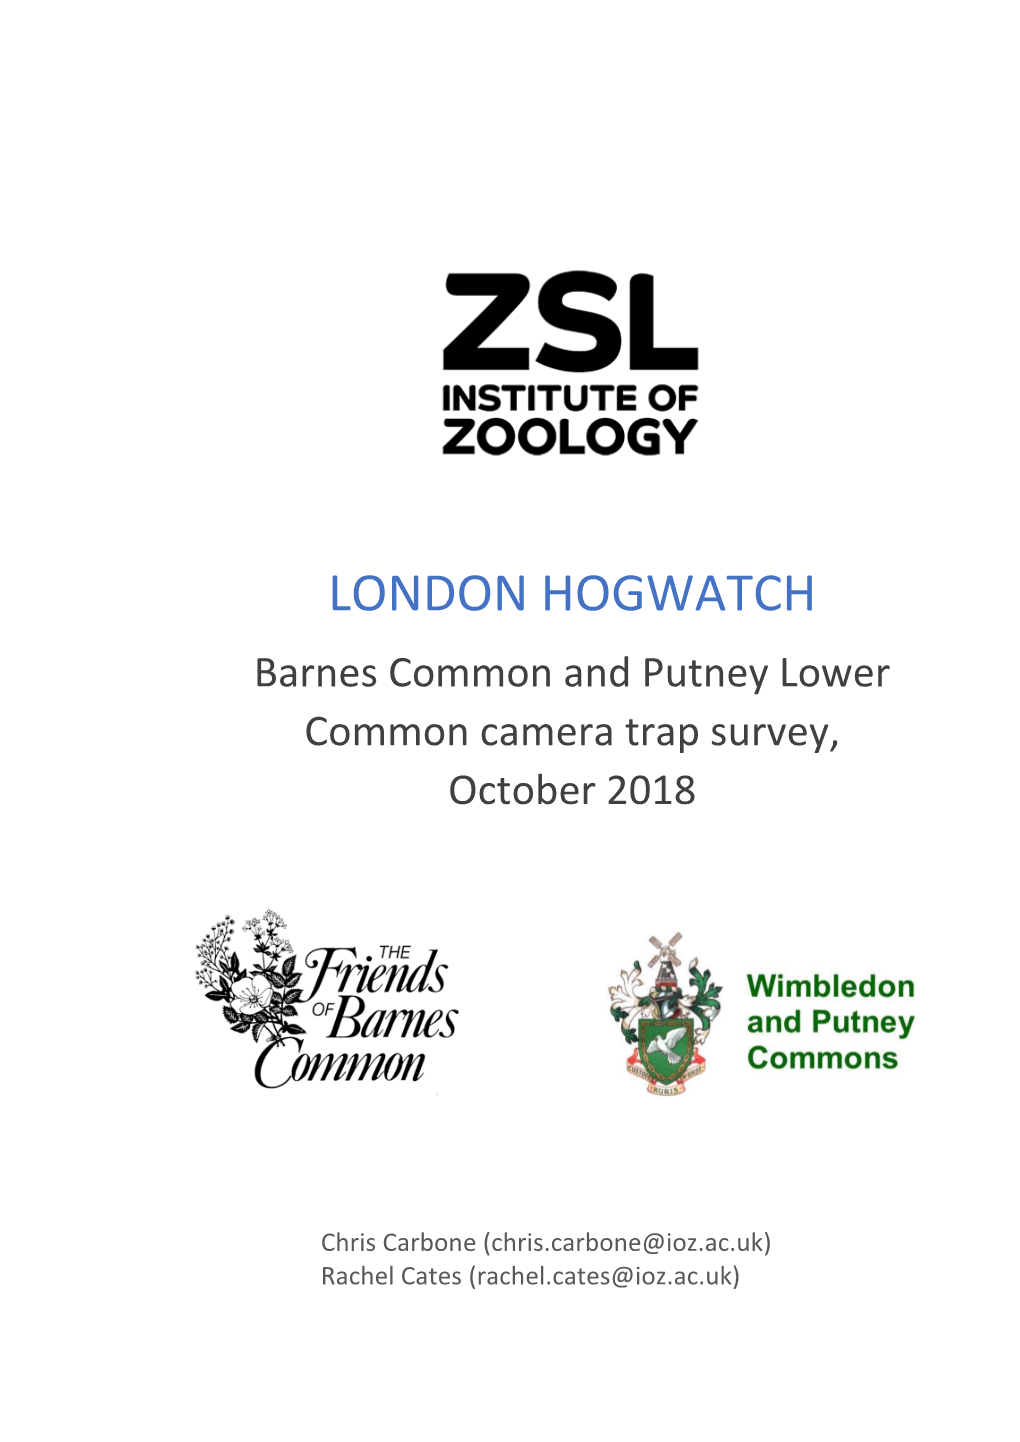 LONDON HOGWATCH Barnes Common and Putney Lower Common Camera Trap Survey, October 2018